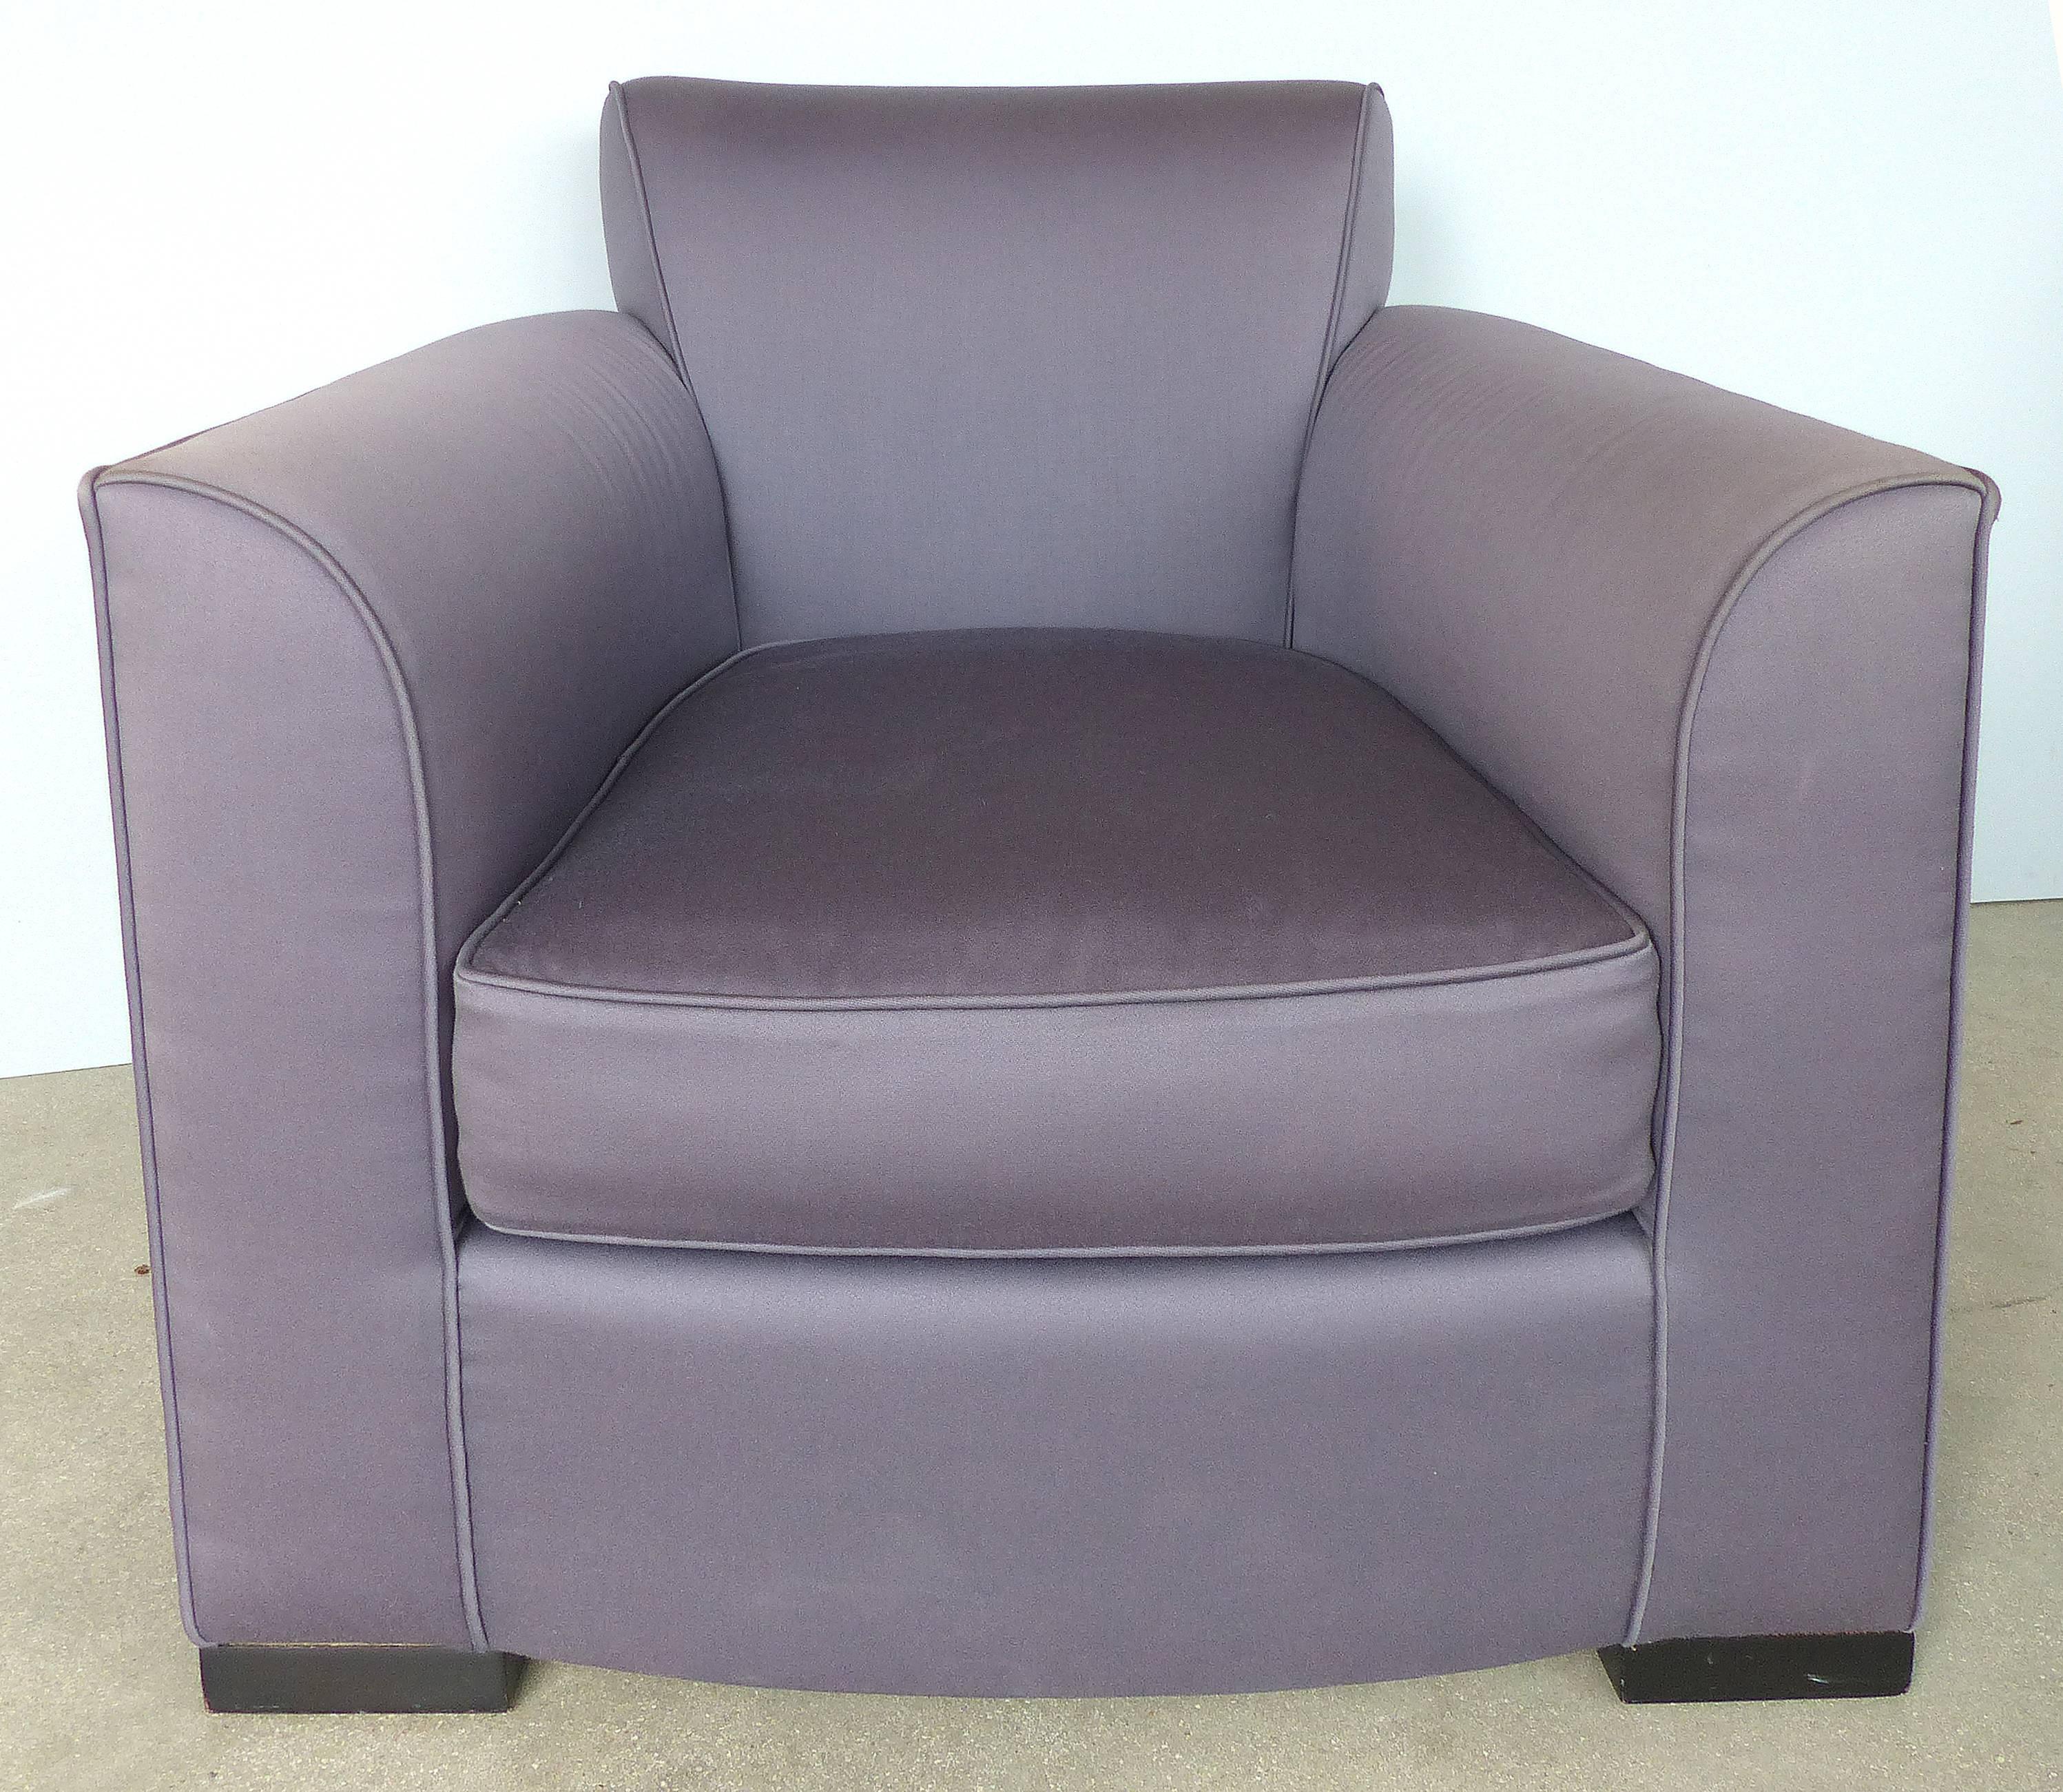 Offered for sale is an incredibly comfortable upholstered 